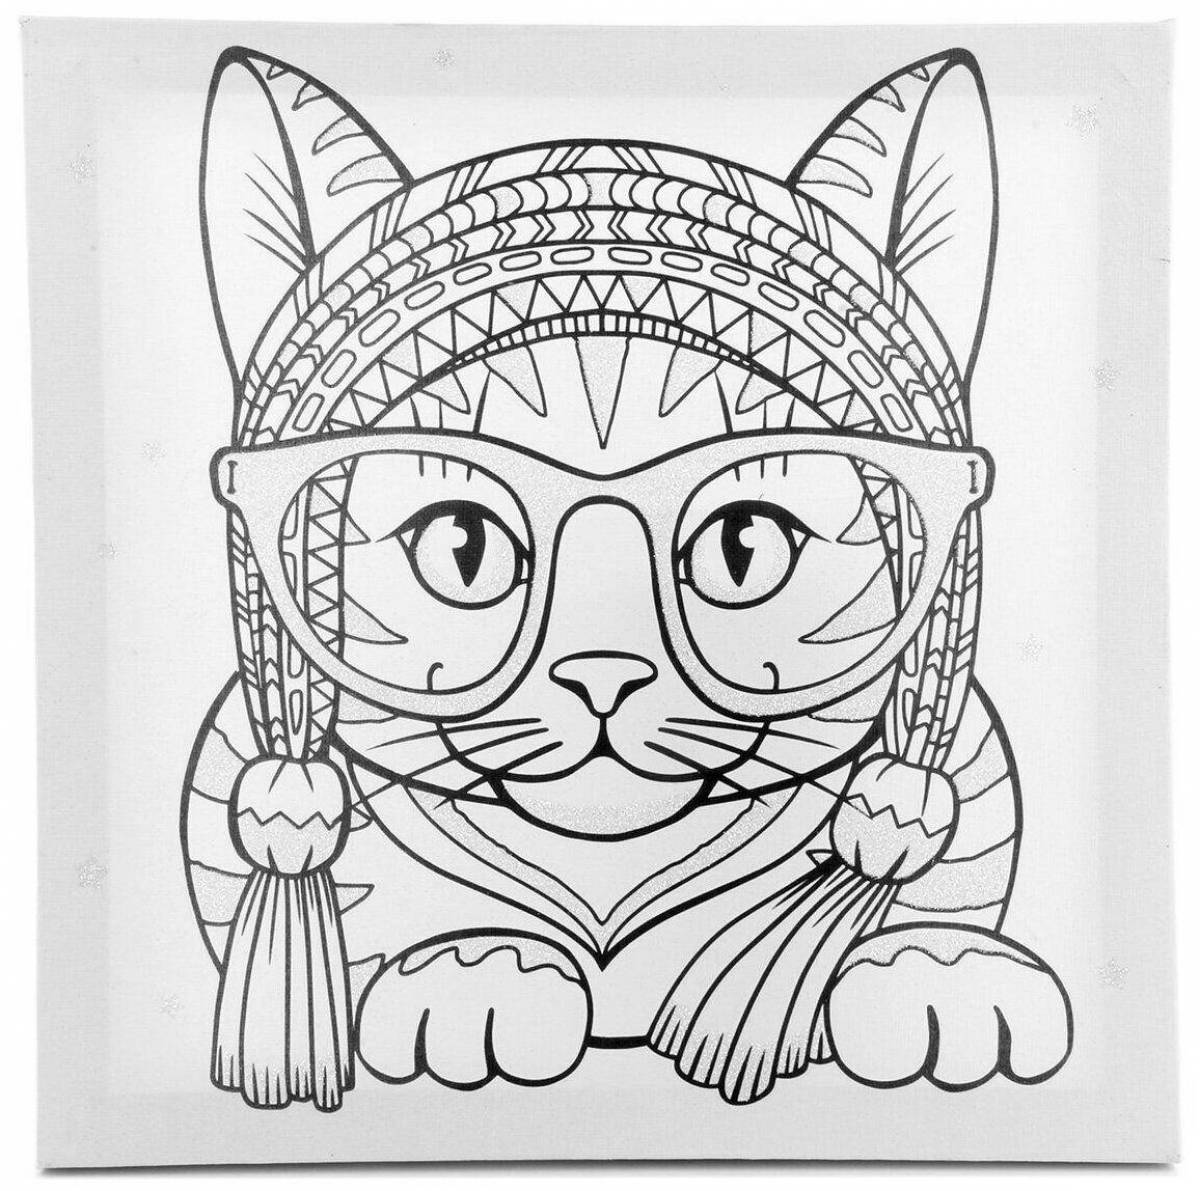 Naughty cat coloring page